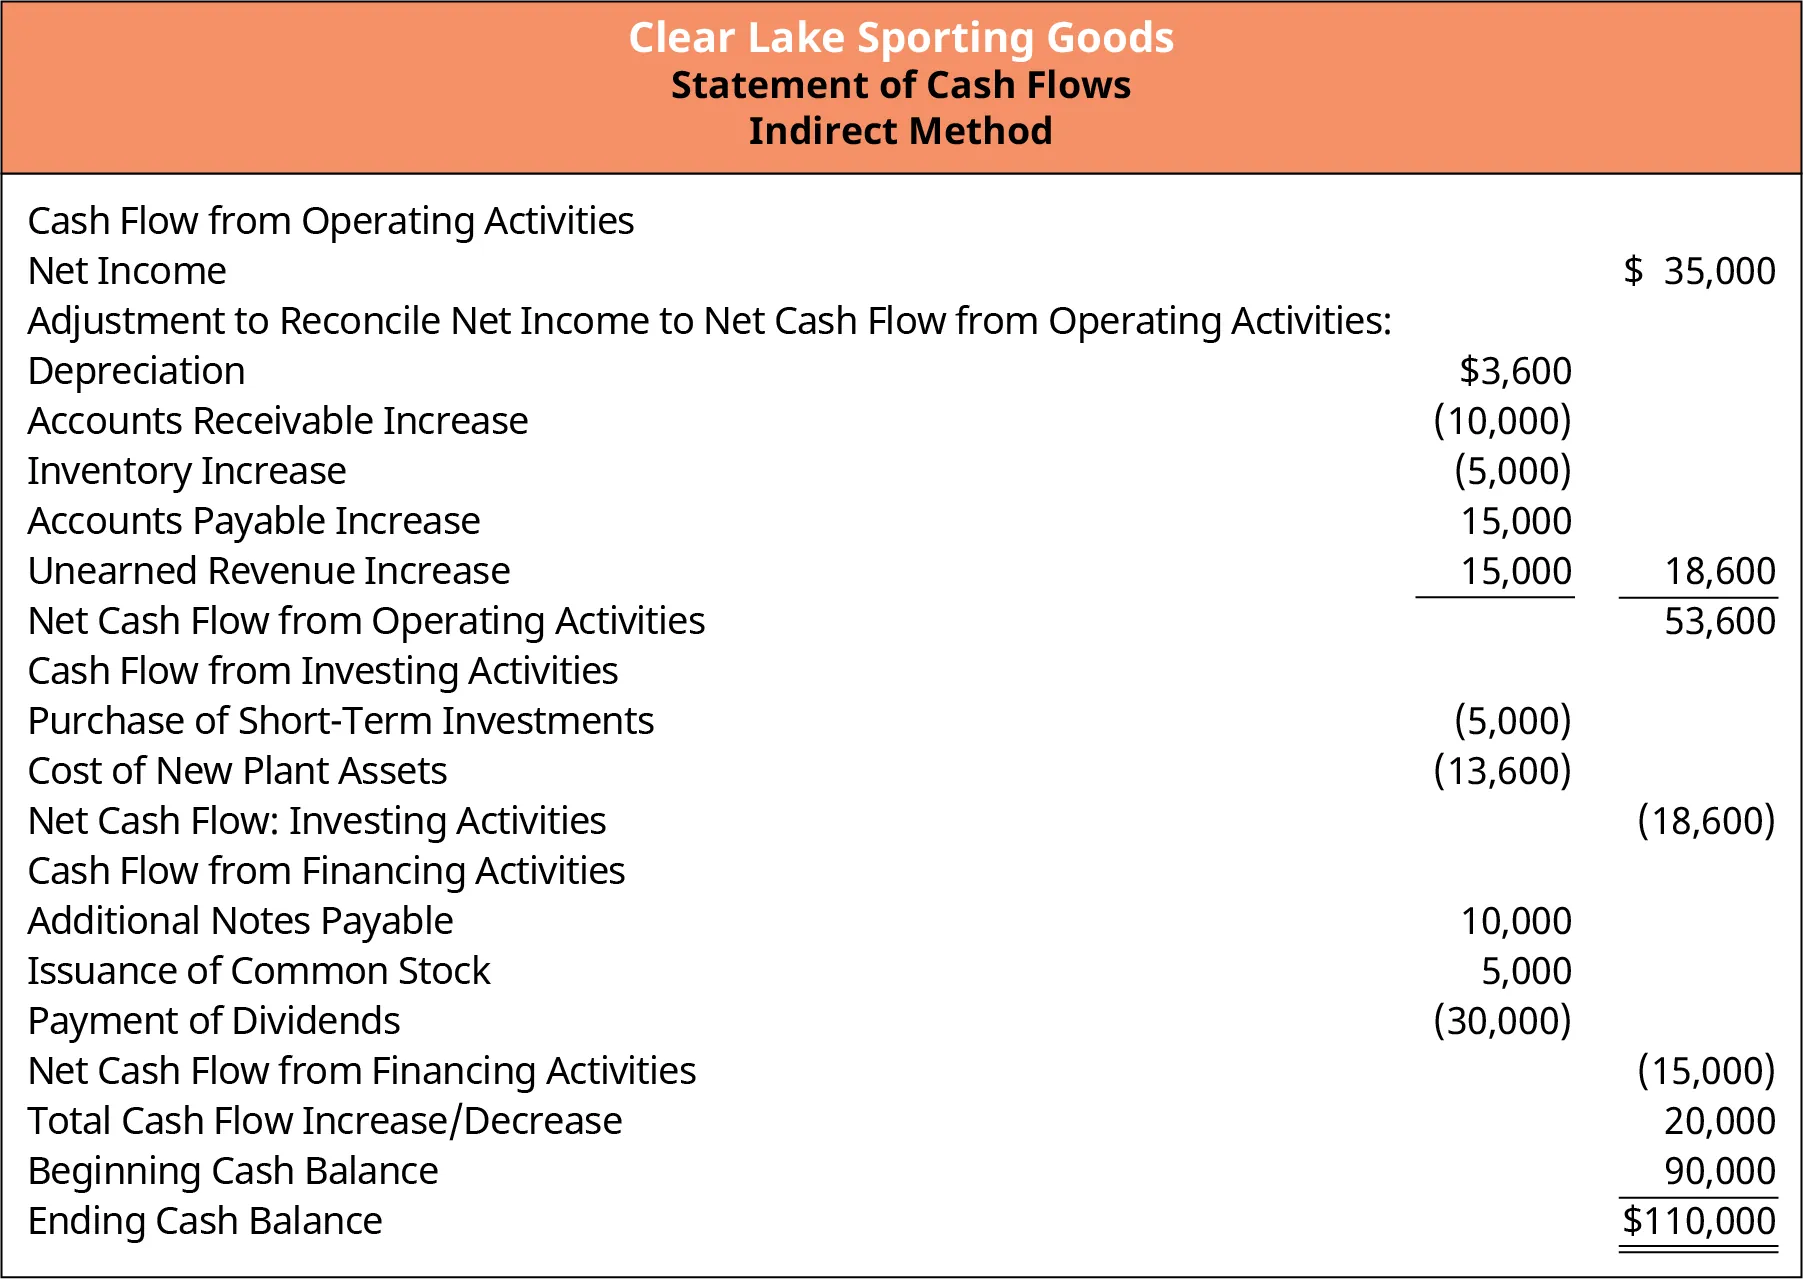 A Statement of Cash Flows for Clear Lake Sporting Goods is broken down into three key categories: operating, financing, and investing. The totals from these three categories are added to the net income to determine the total cash flow increase or decrease. This is added to the beginning cash balance to determine the ending cash balance.